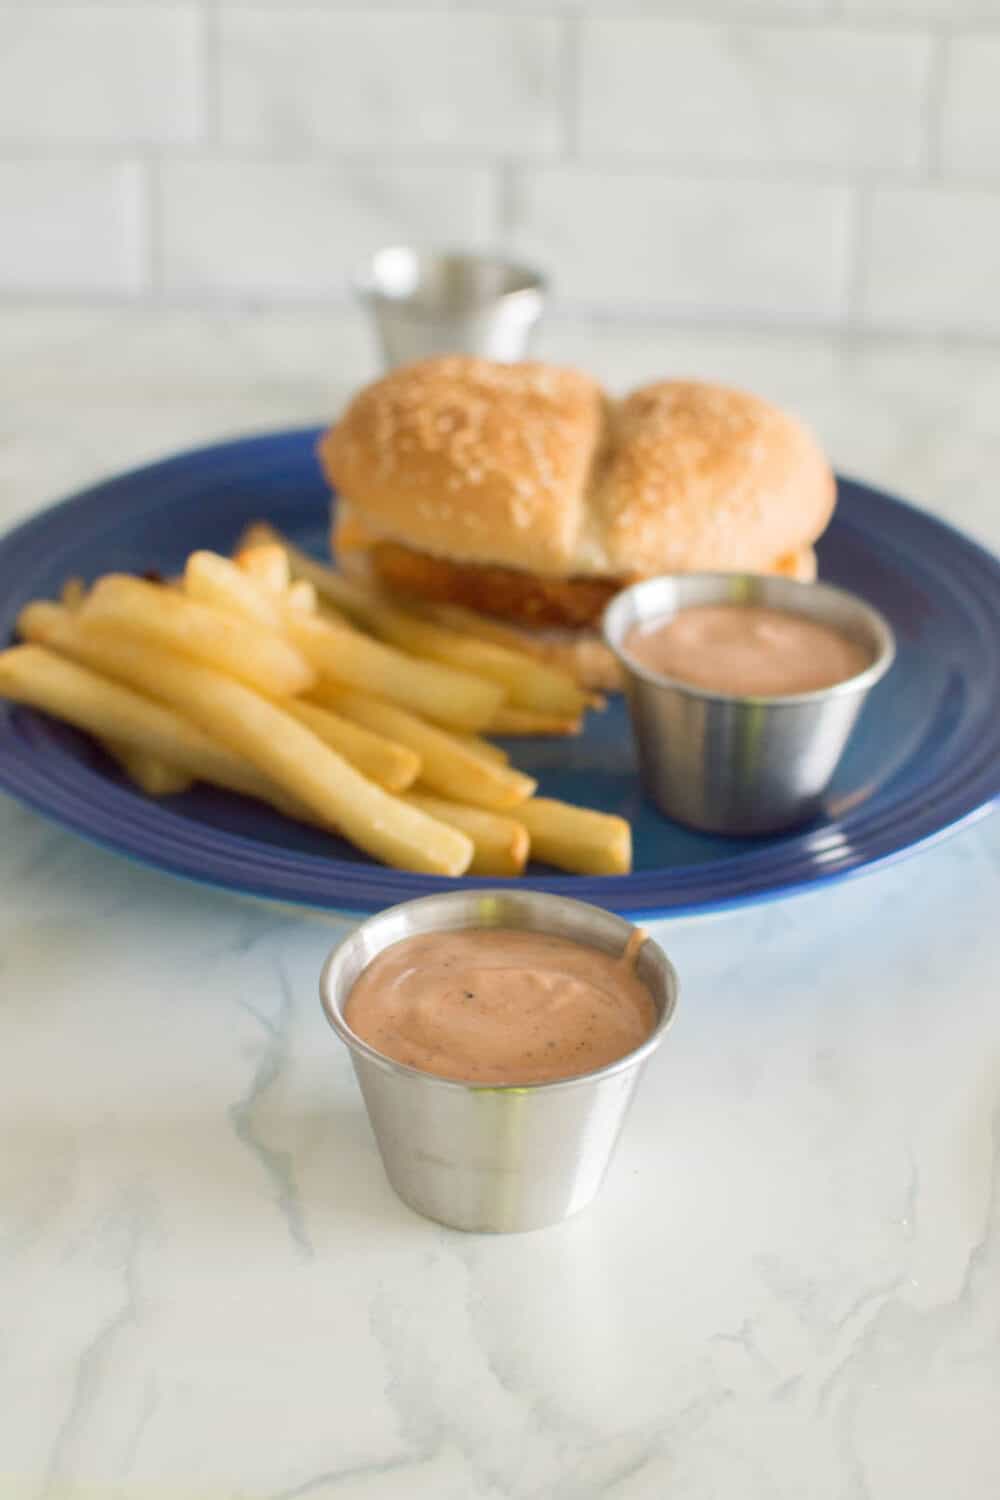 Homemade Guthrie’s Sauce in a small, silver bowl with a chicken burger and French fries on a blue plate in the background